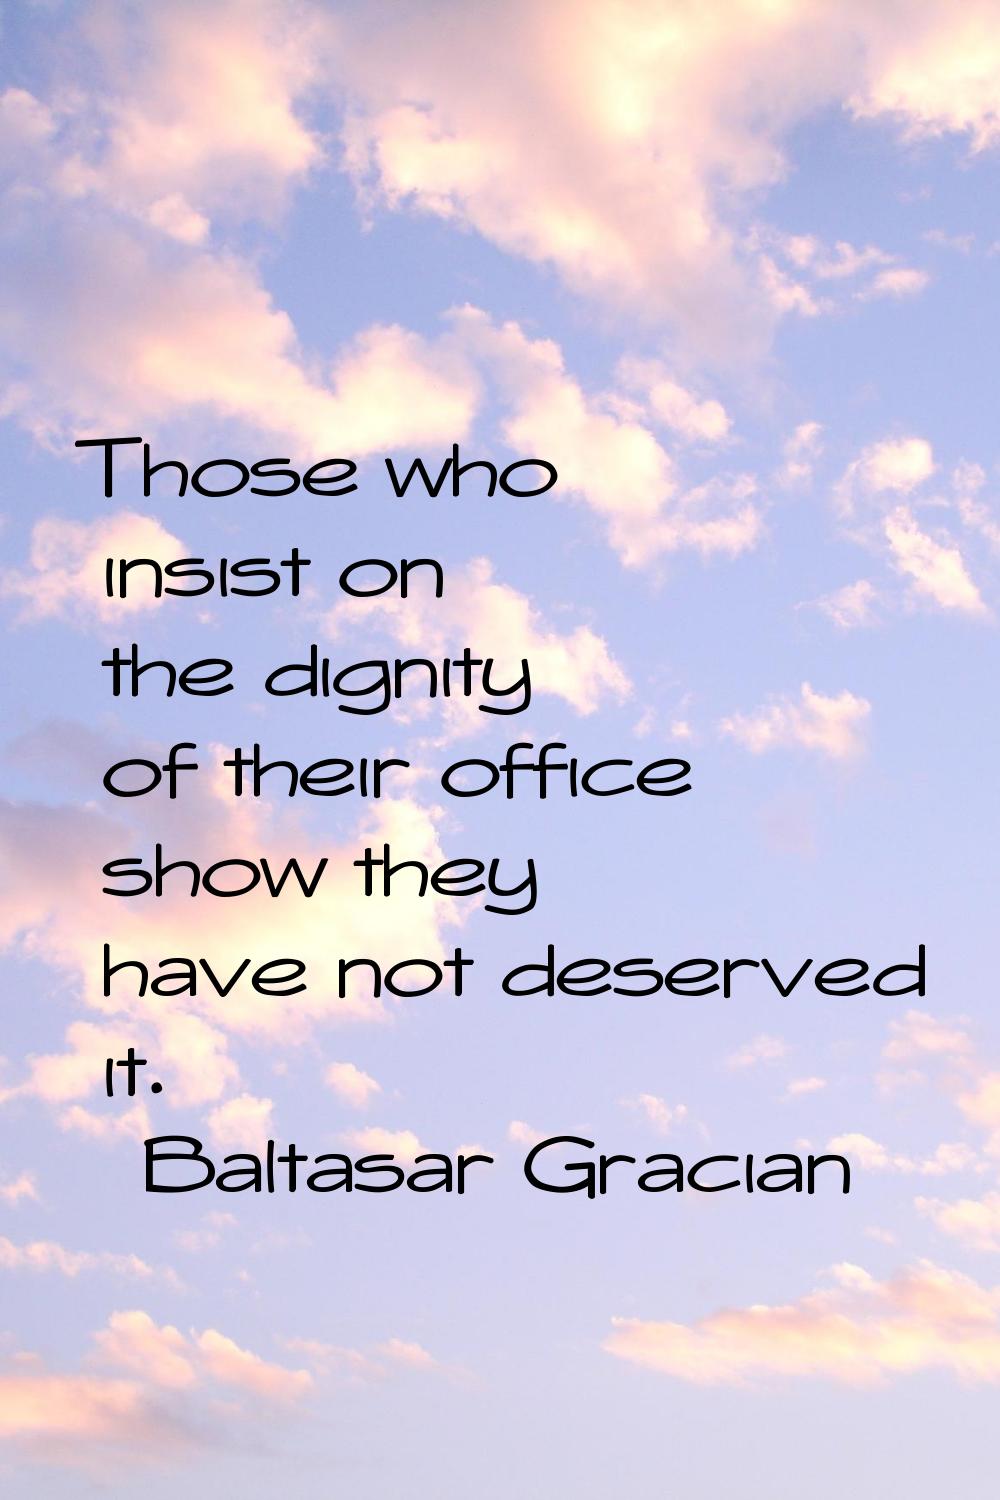 Those who insist on the dignity of their office show they have not deserved it.